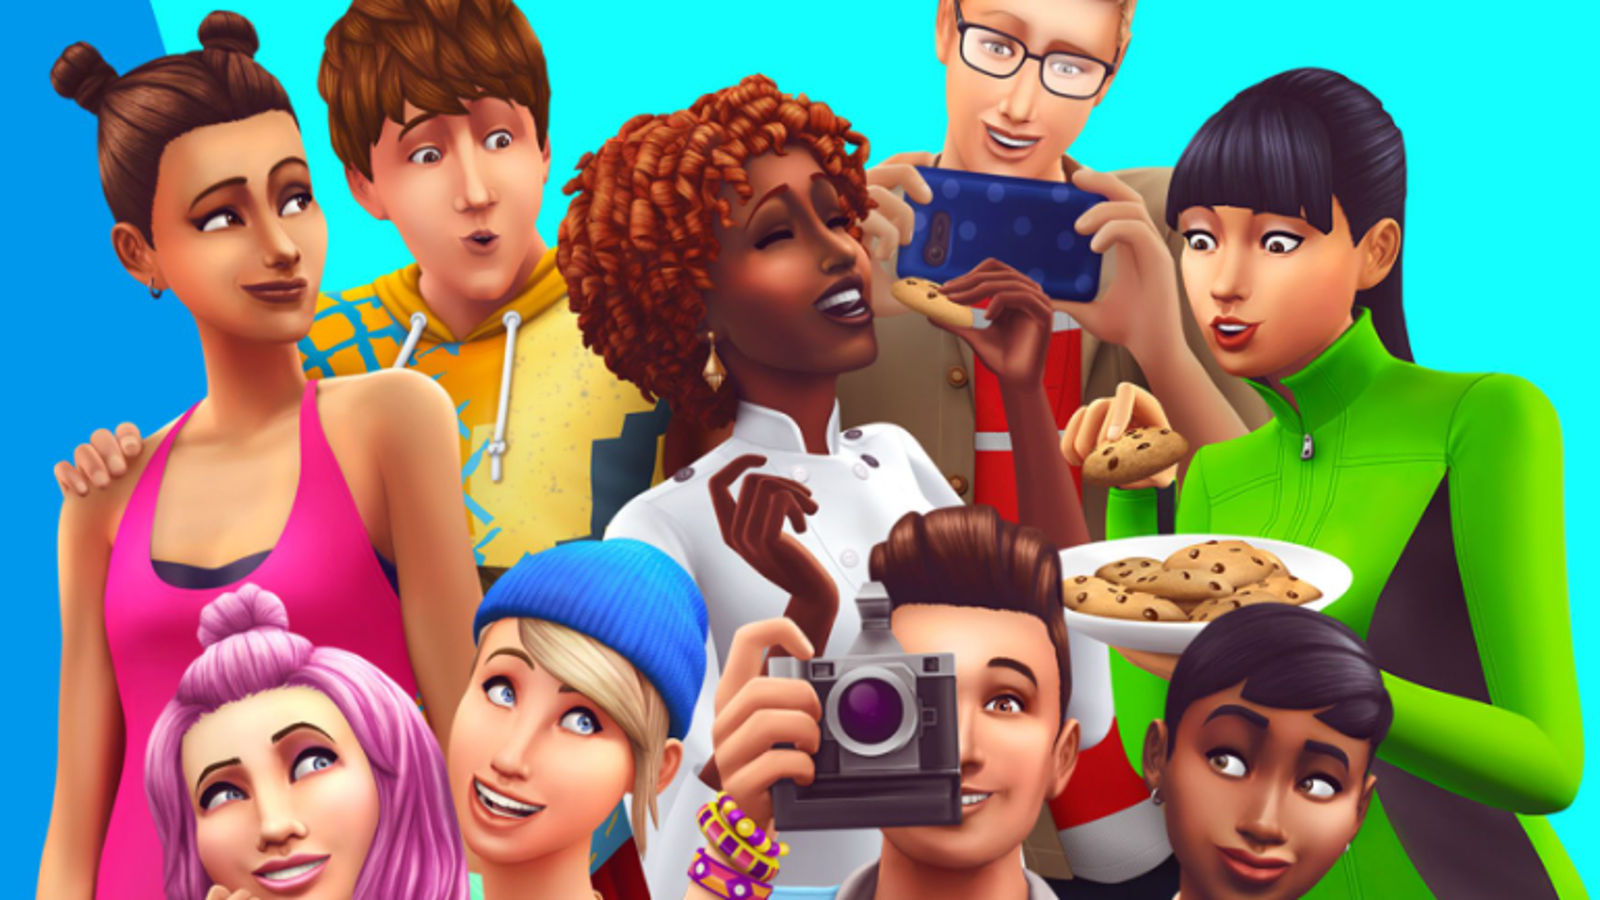 Sims 4 cheats: Full list of cheat codes for PS4, PS5, Xbox and PC